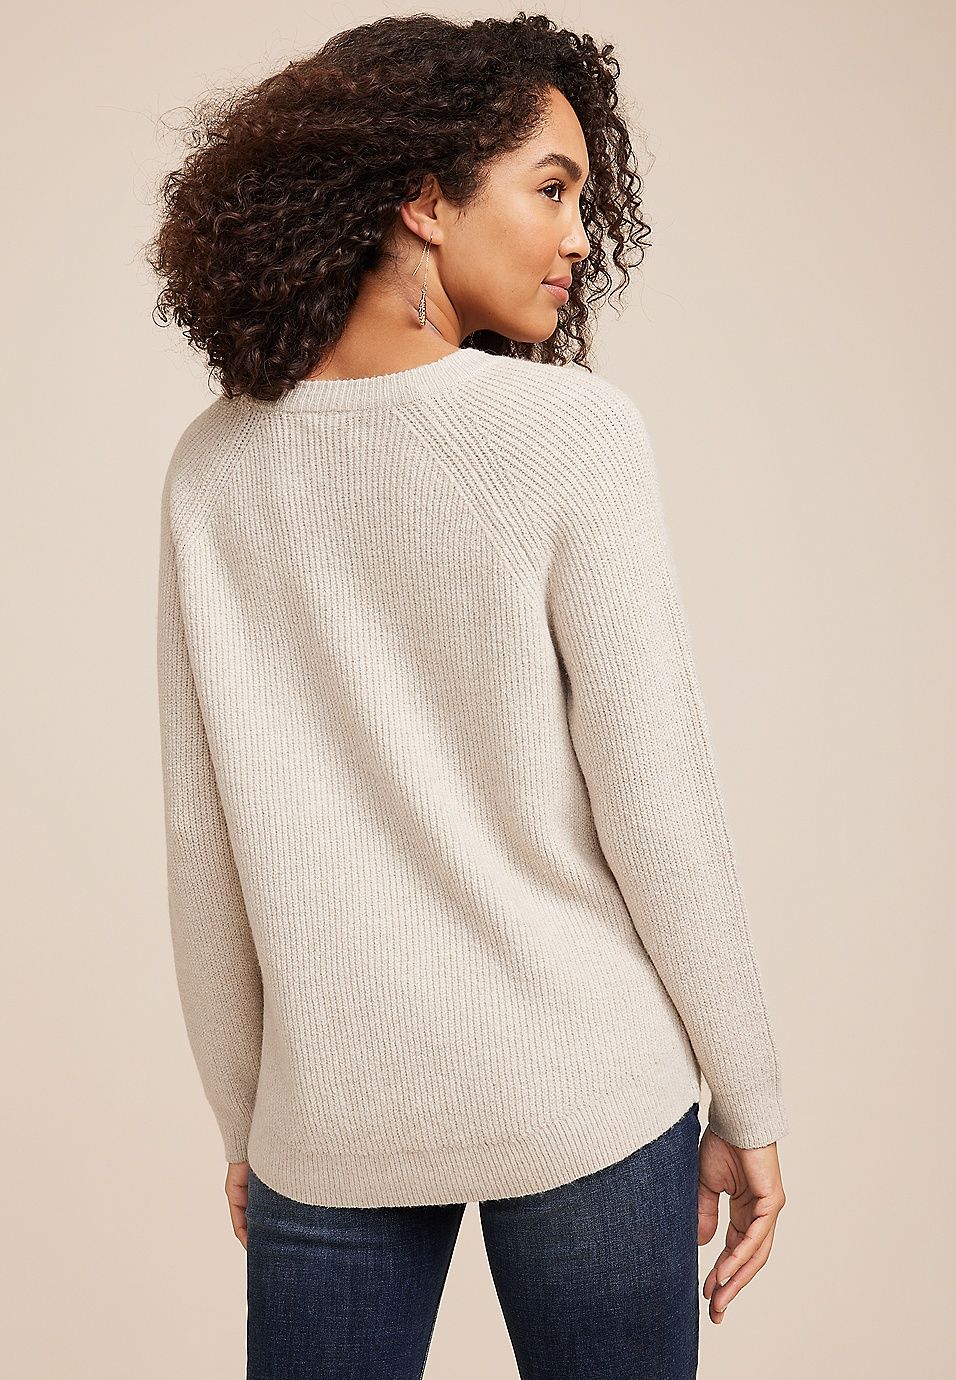 Dells Sweater | Maurices